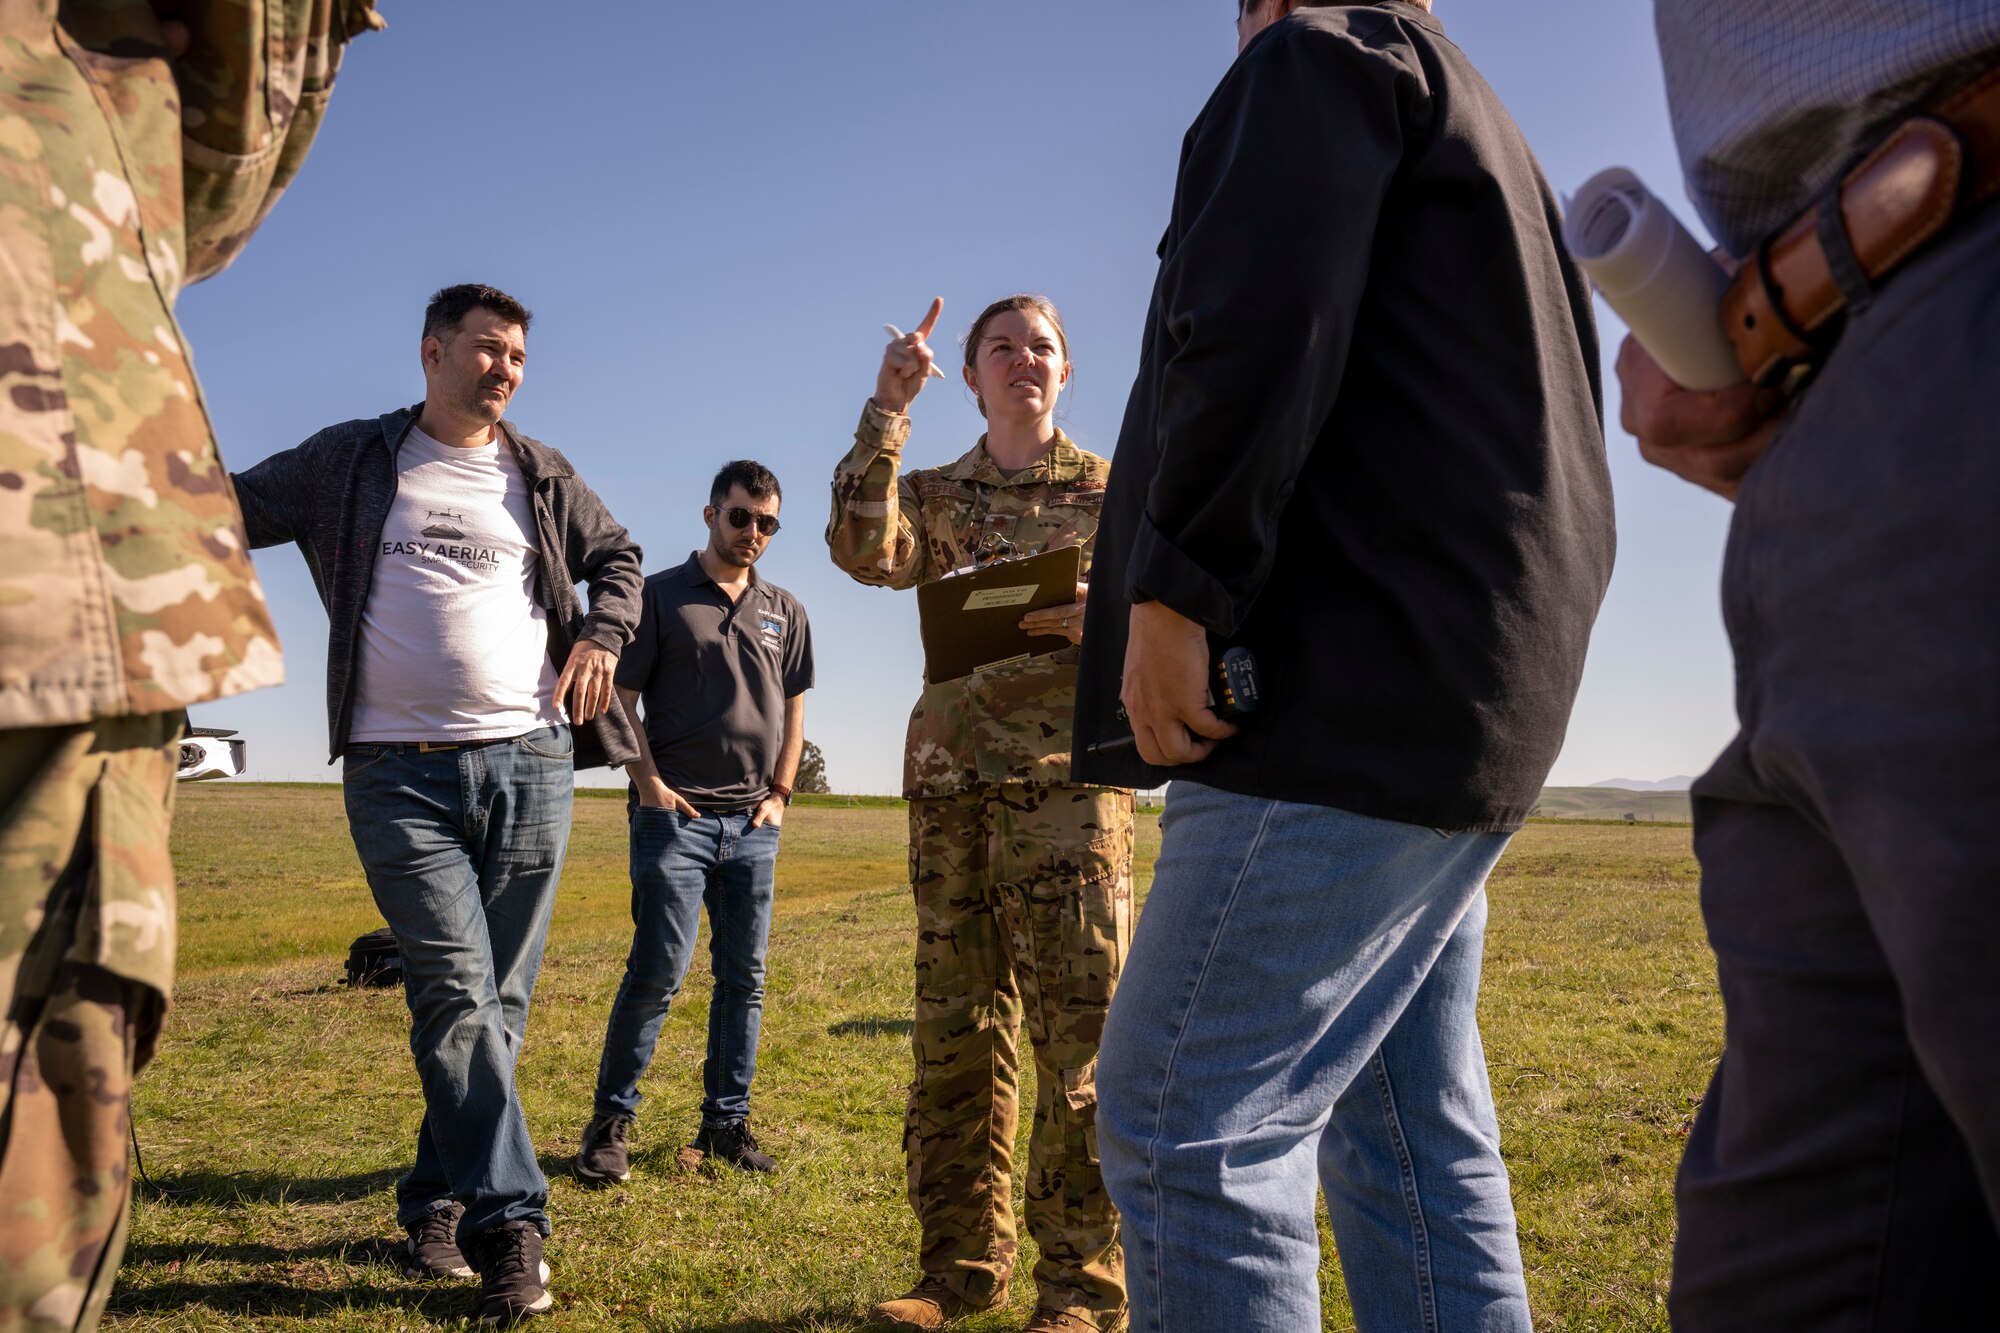 A woman in the Air Force talks to civilian personnel in a group.